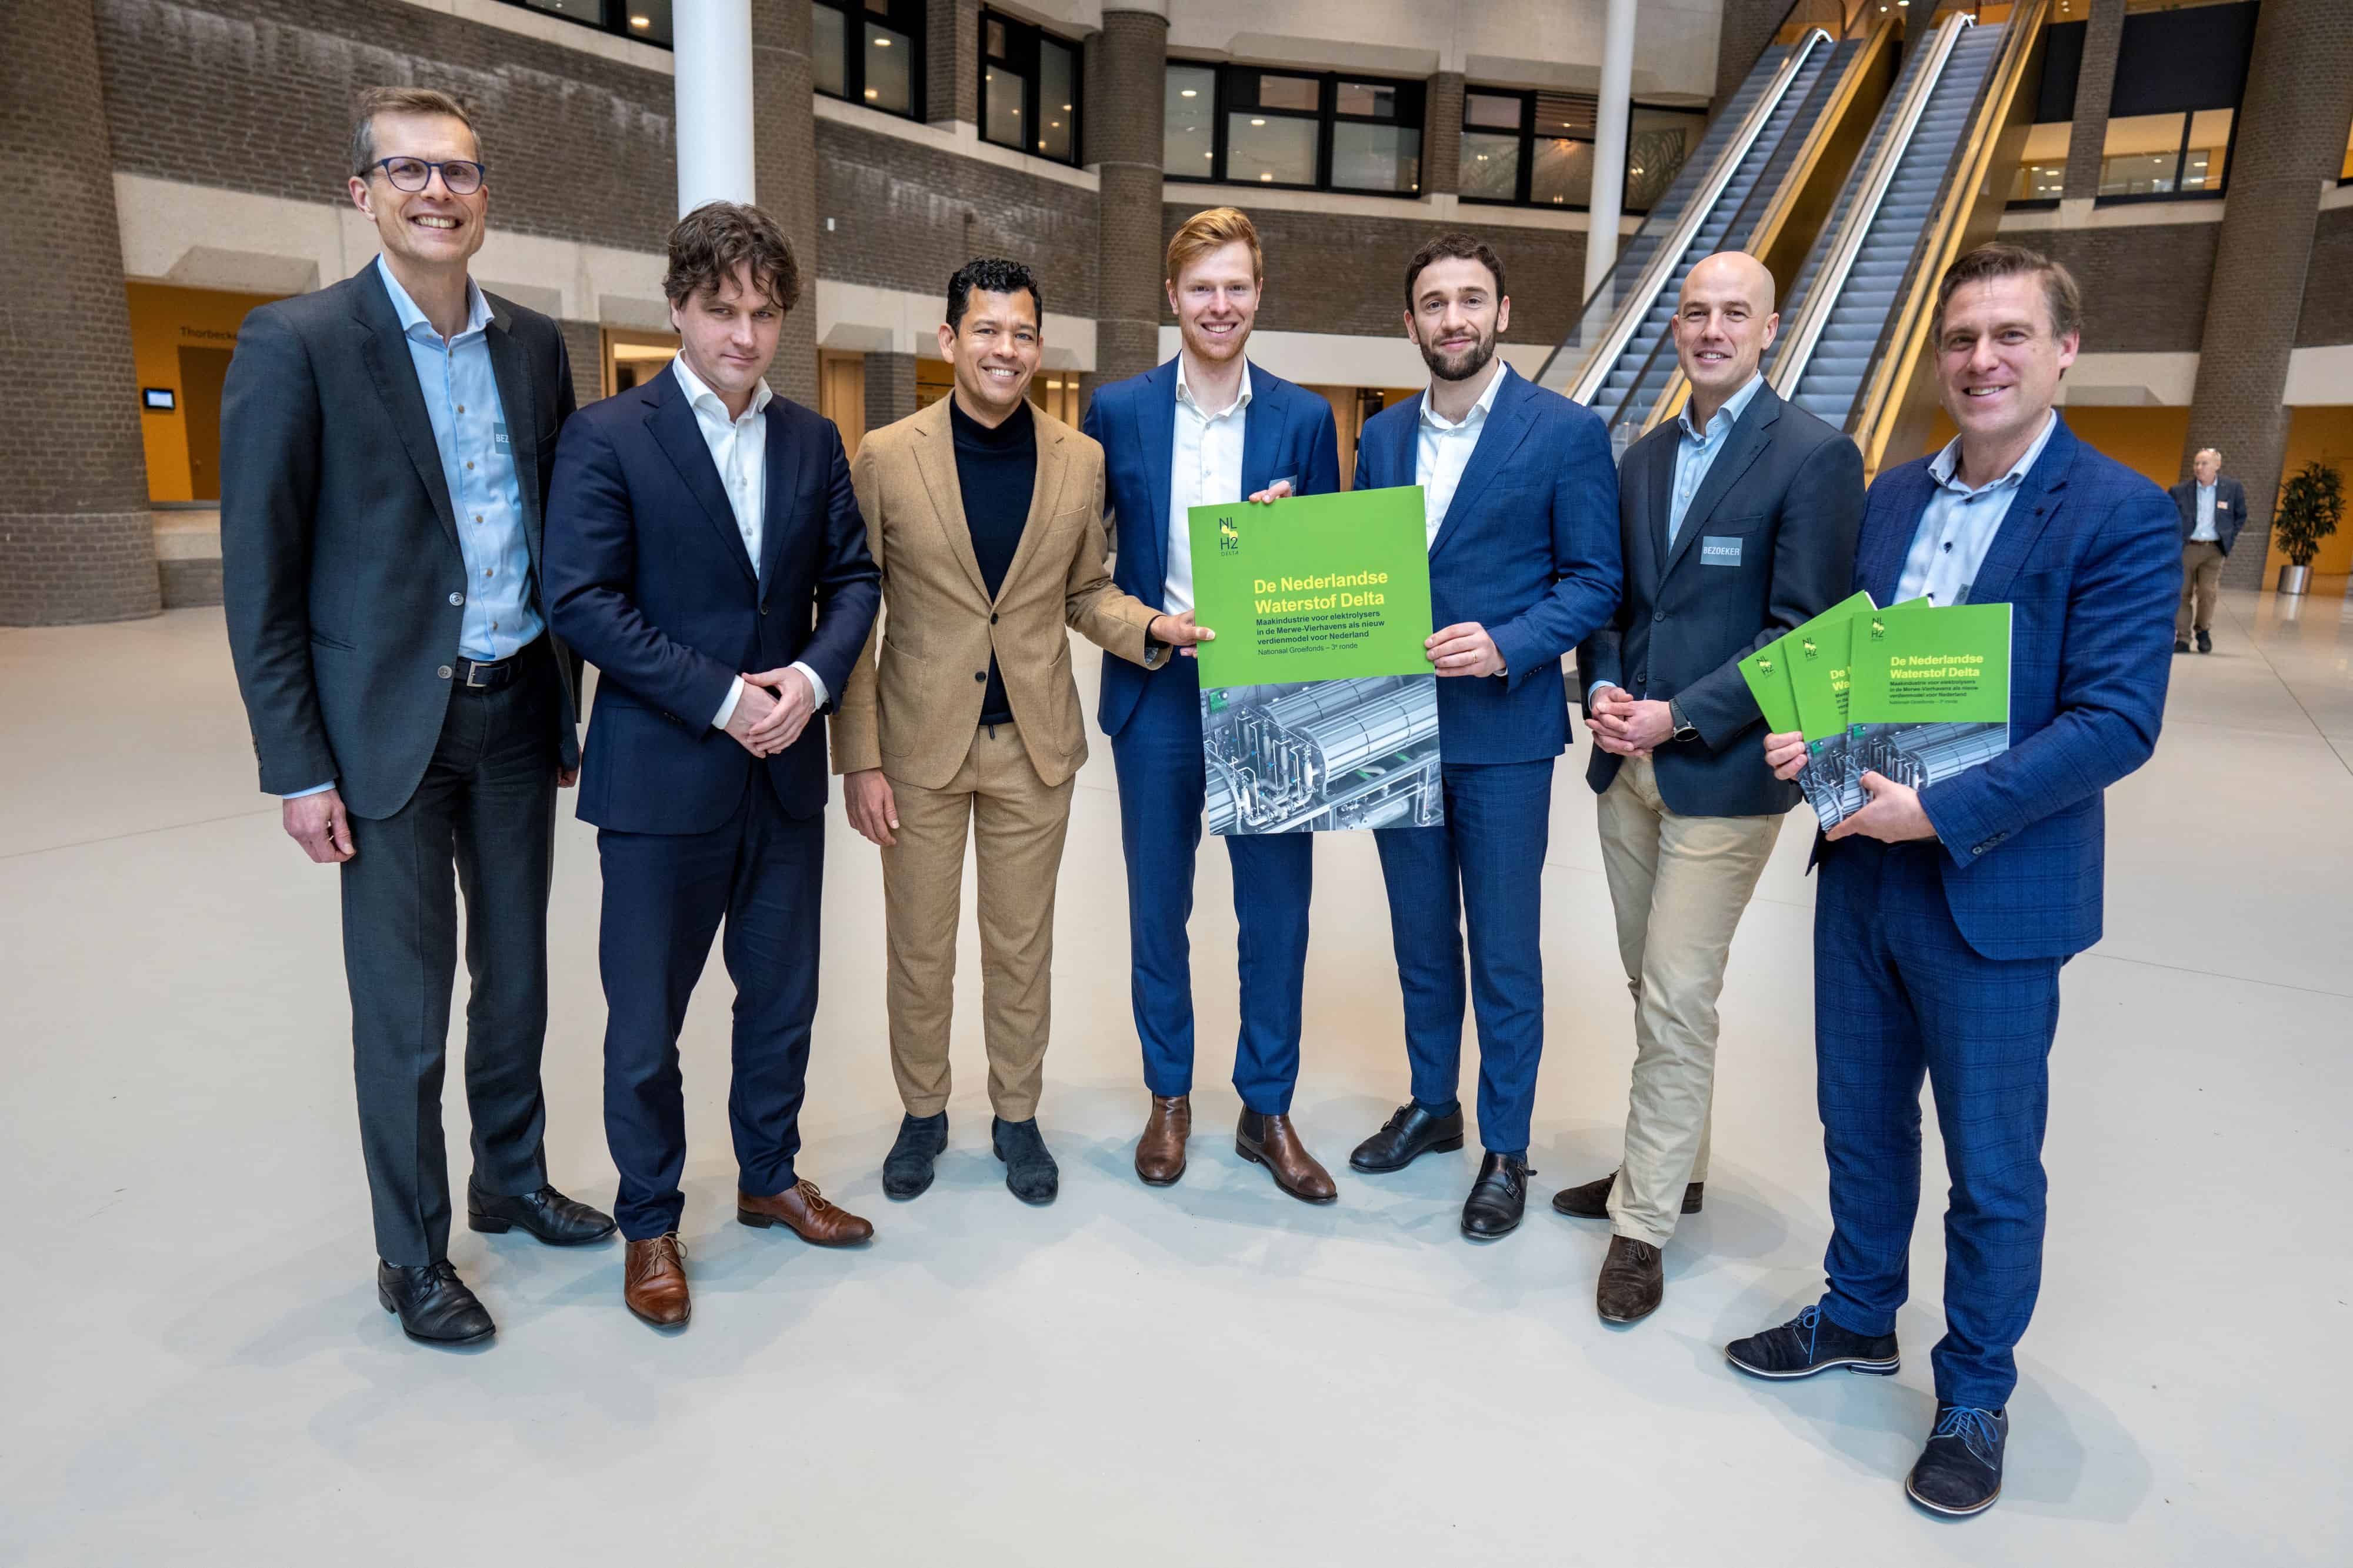 The Dutch Hydrogen Delta hands over plan to accelerate hydrogen economy